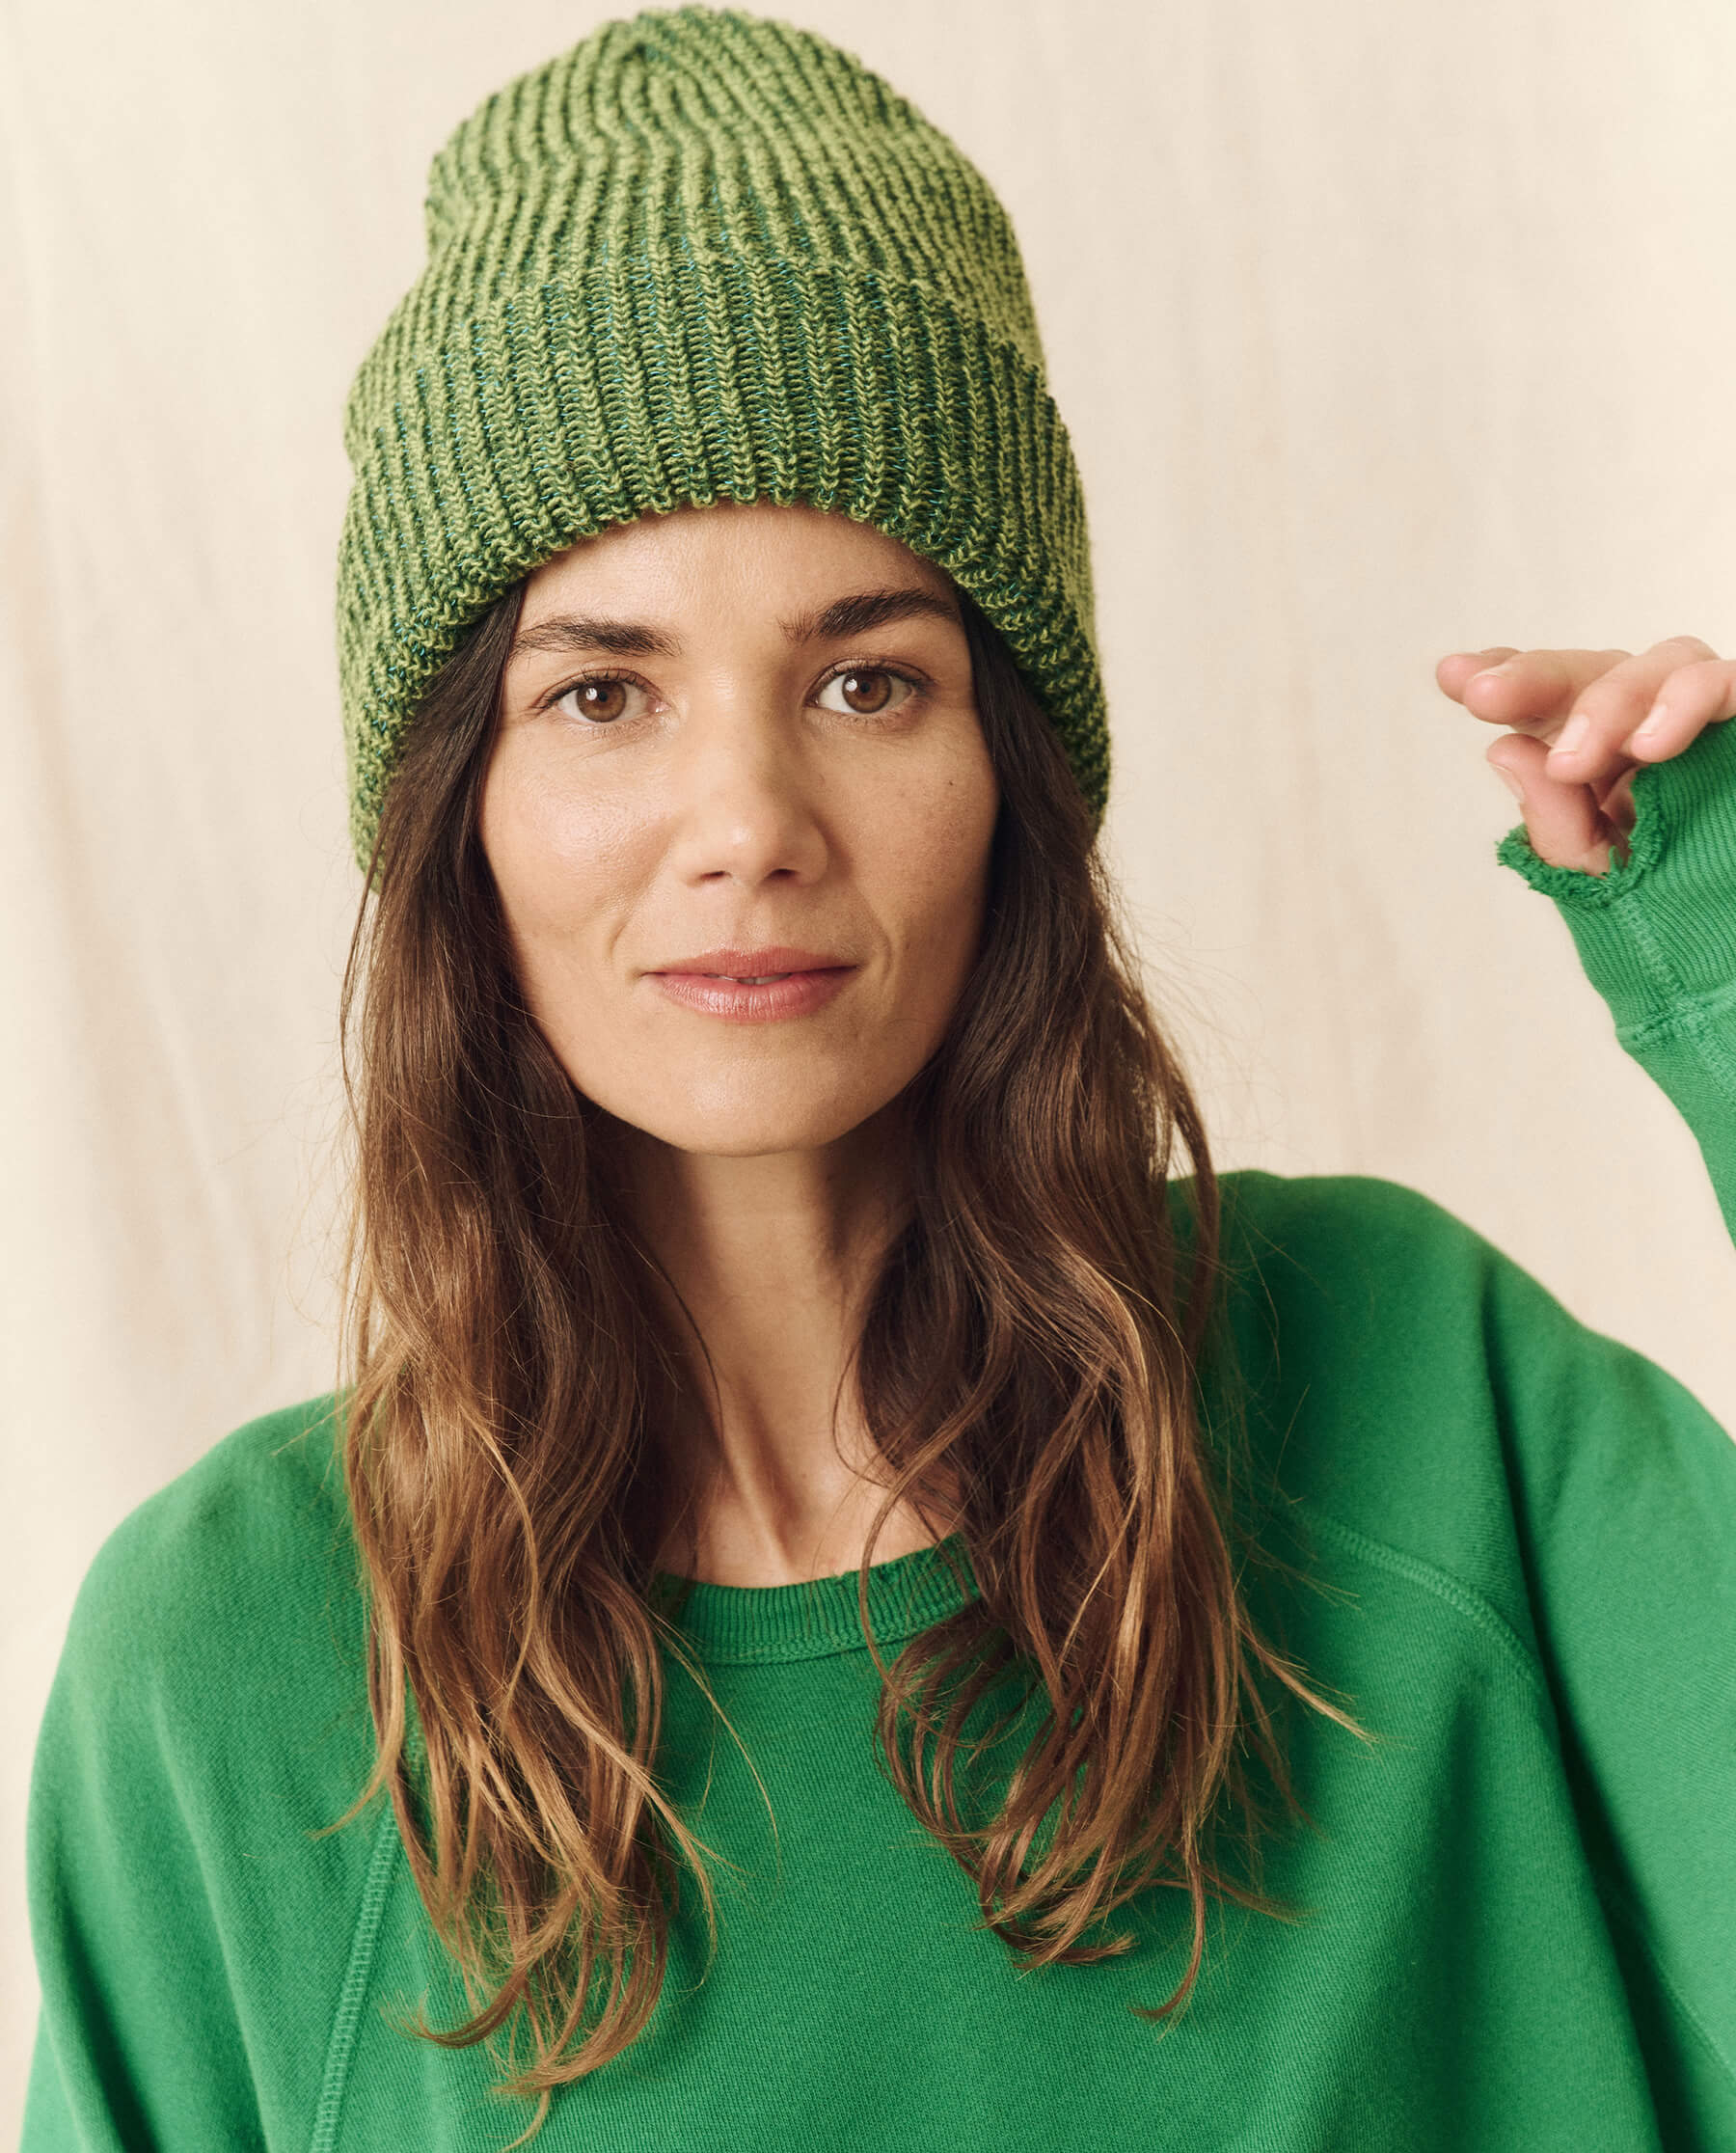 The Beanie. -- Marled Holly Leaf HATS THE GREAT. HOL 23 ACCESSORIES